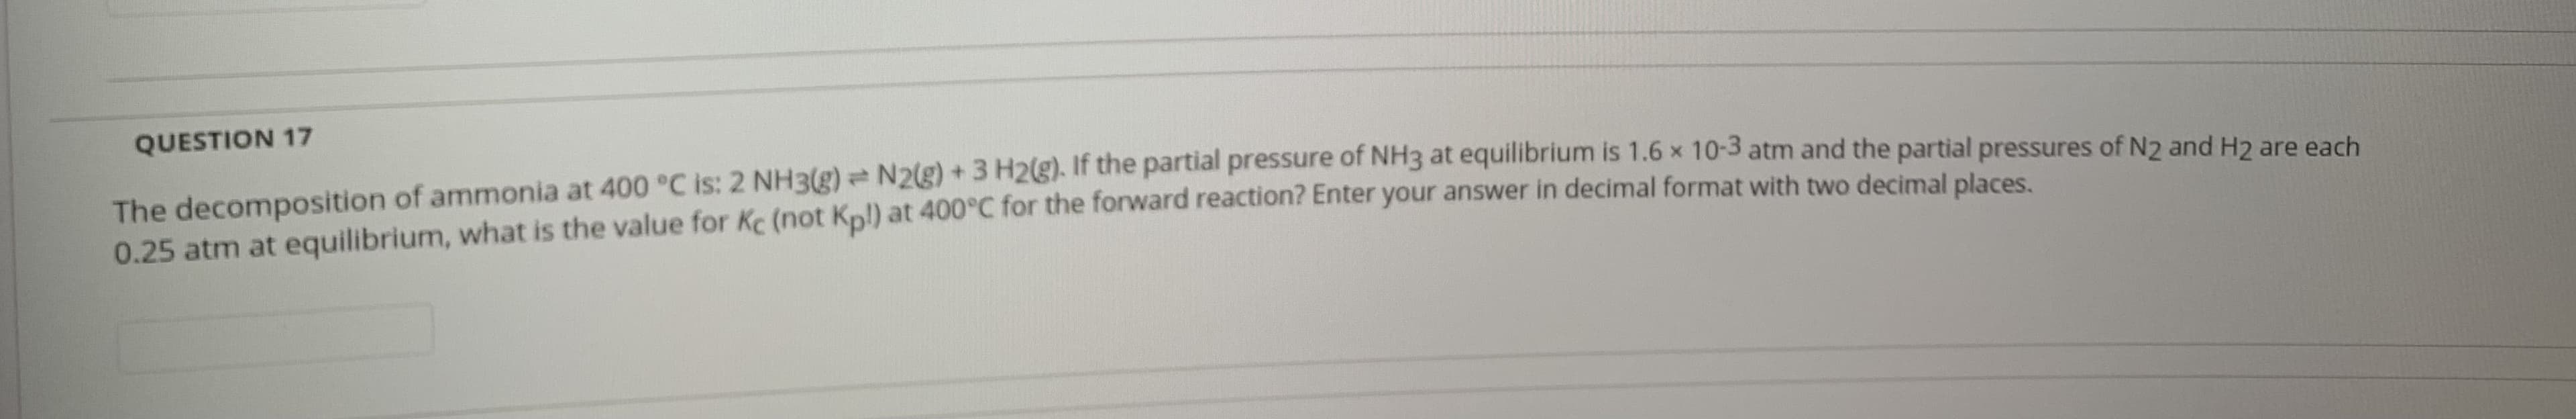 QUESTION 17
The decomposition of ammonia at 400 °C is: 2 NH3(g) N2g) + 3 H2). If the partial pressure of NH3 at equilibrium is 1.6 x 10-3 atm and the partial pressures of N2 and H2 are each
0.25 atm at equilibrium, what is the value for Kc (not Kpl) at 400°C for the forward reaction? Enter your answer in decimal format with two decimal places
